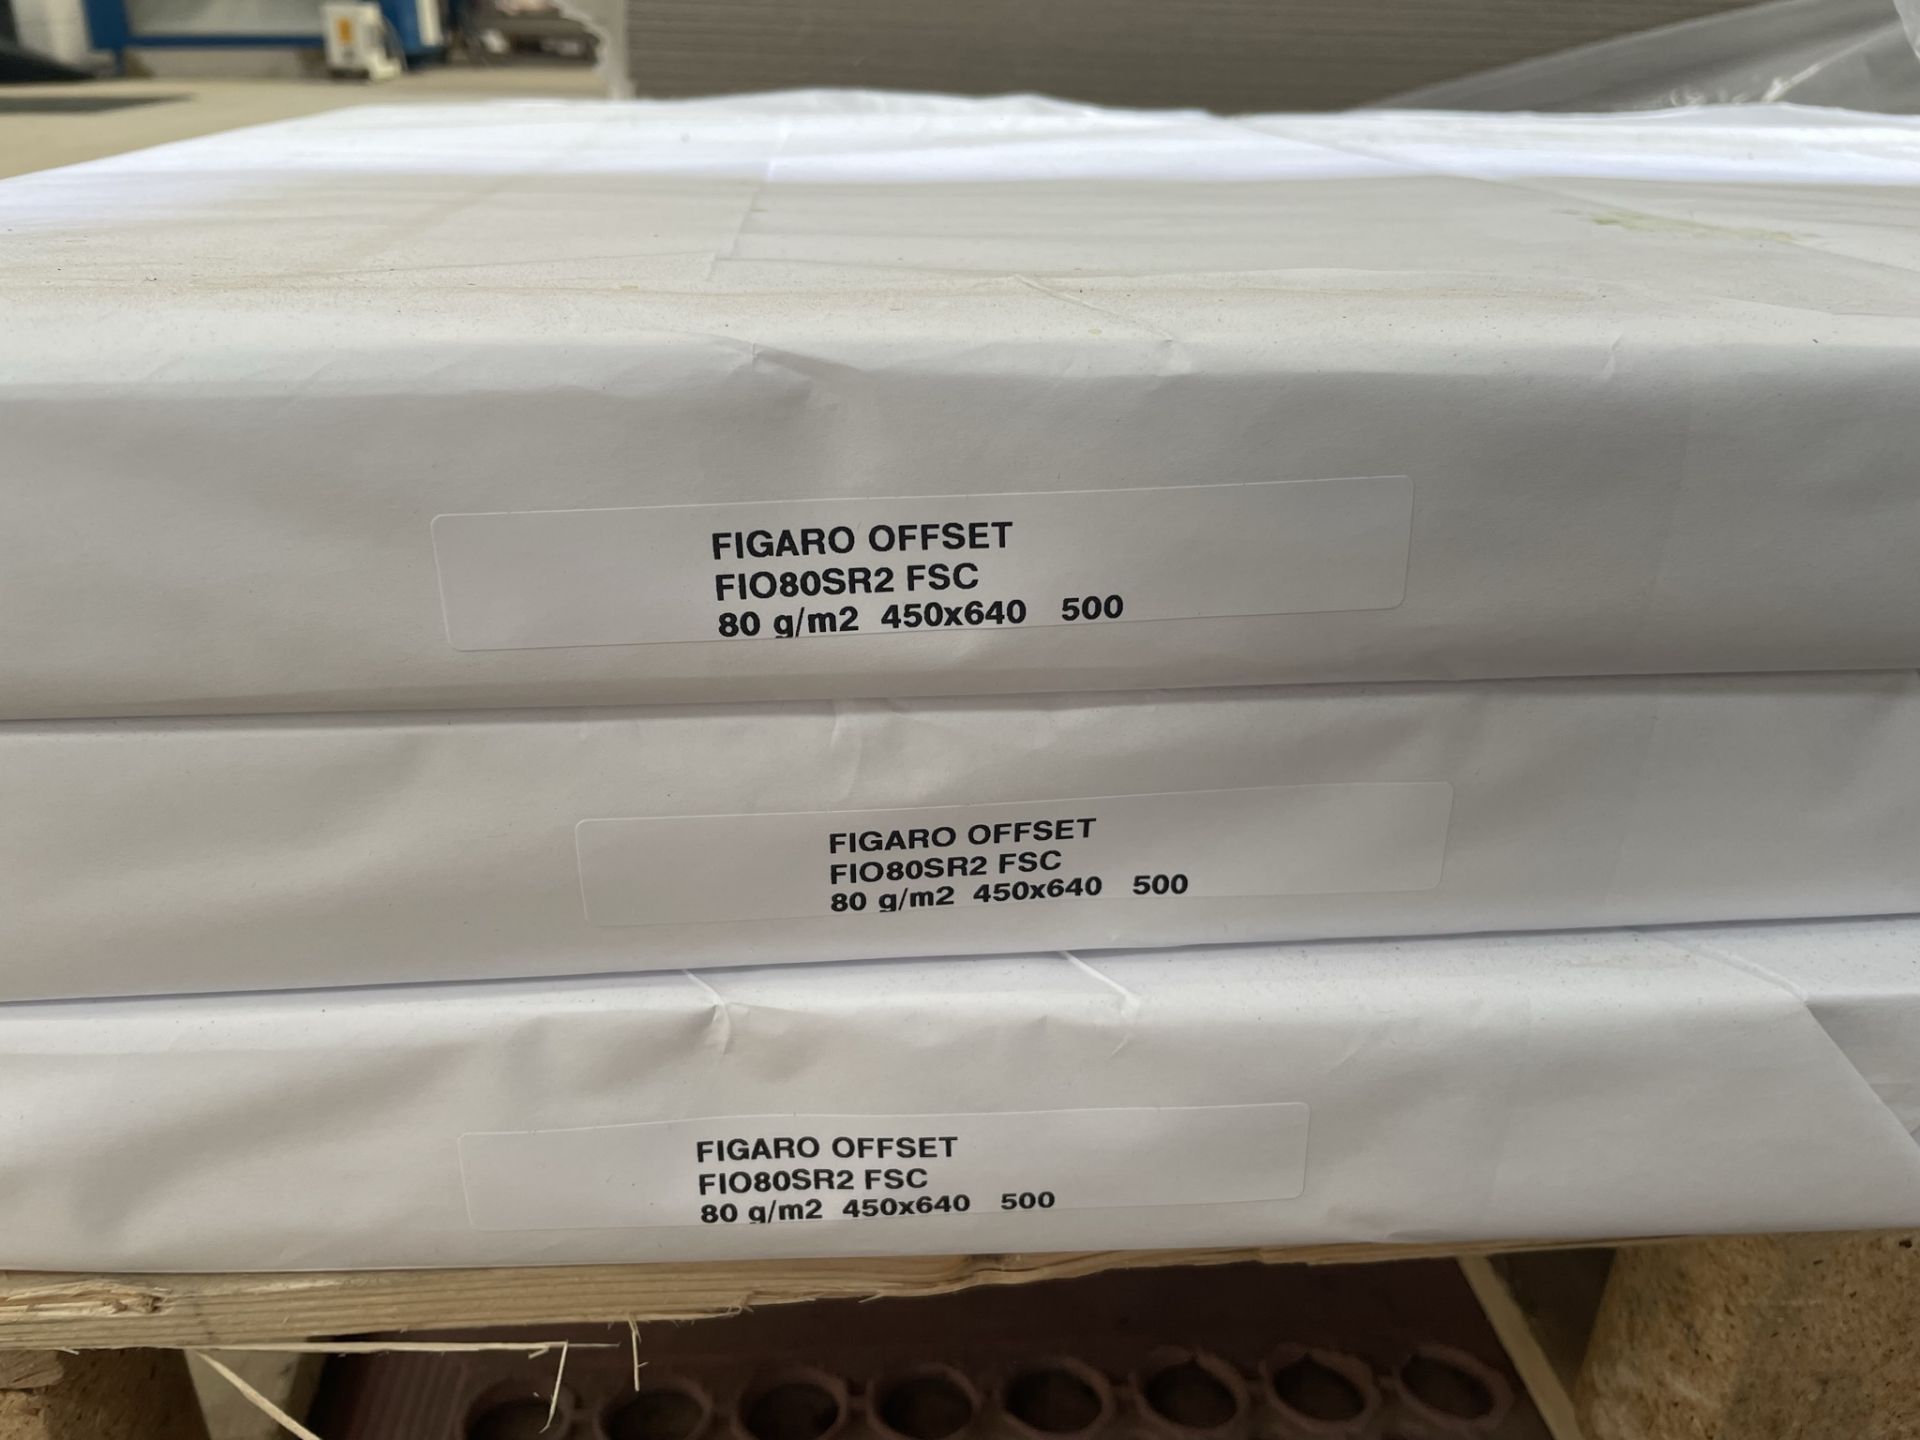 Approximately 3,000 Sheets of Figaro Offset FIO80SR2 FSC 80gm Paper | 450mm x 640mm - Image 2 of 2